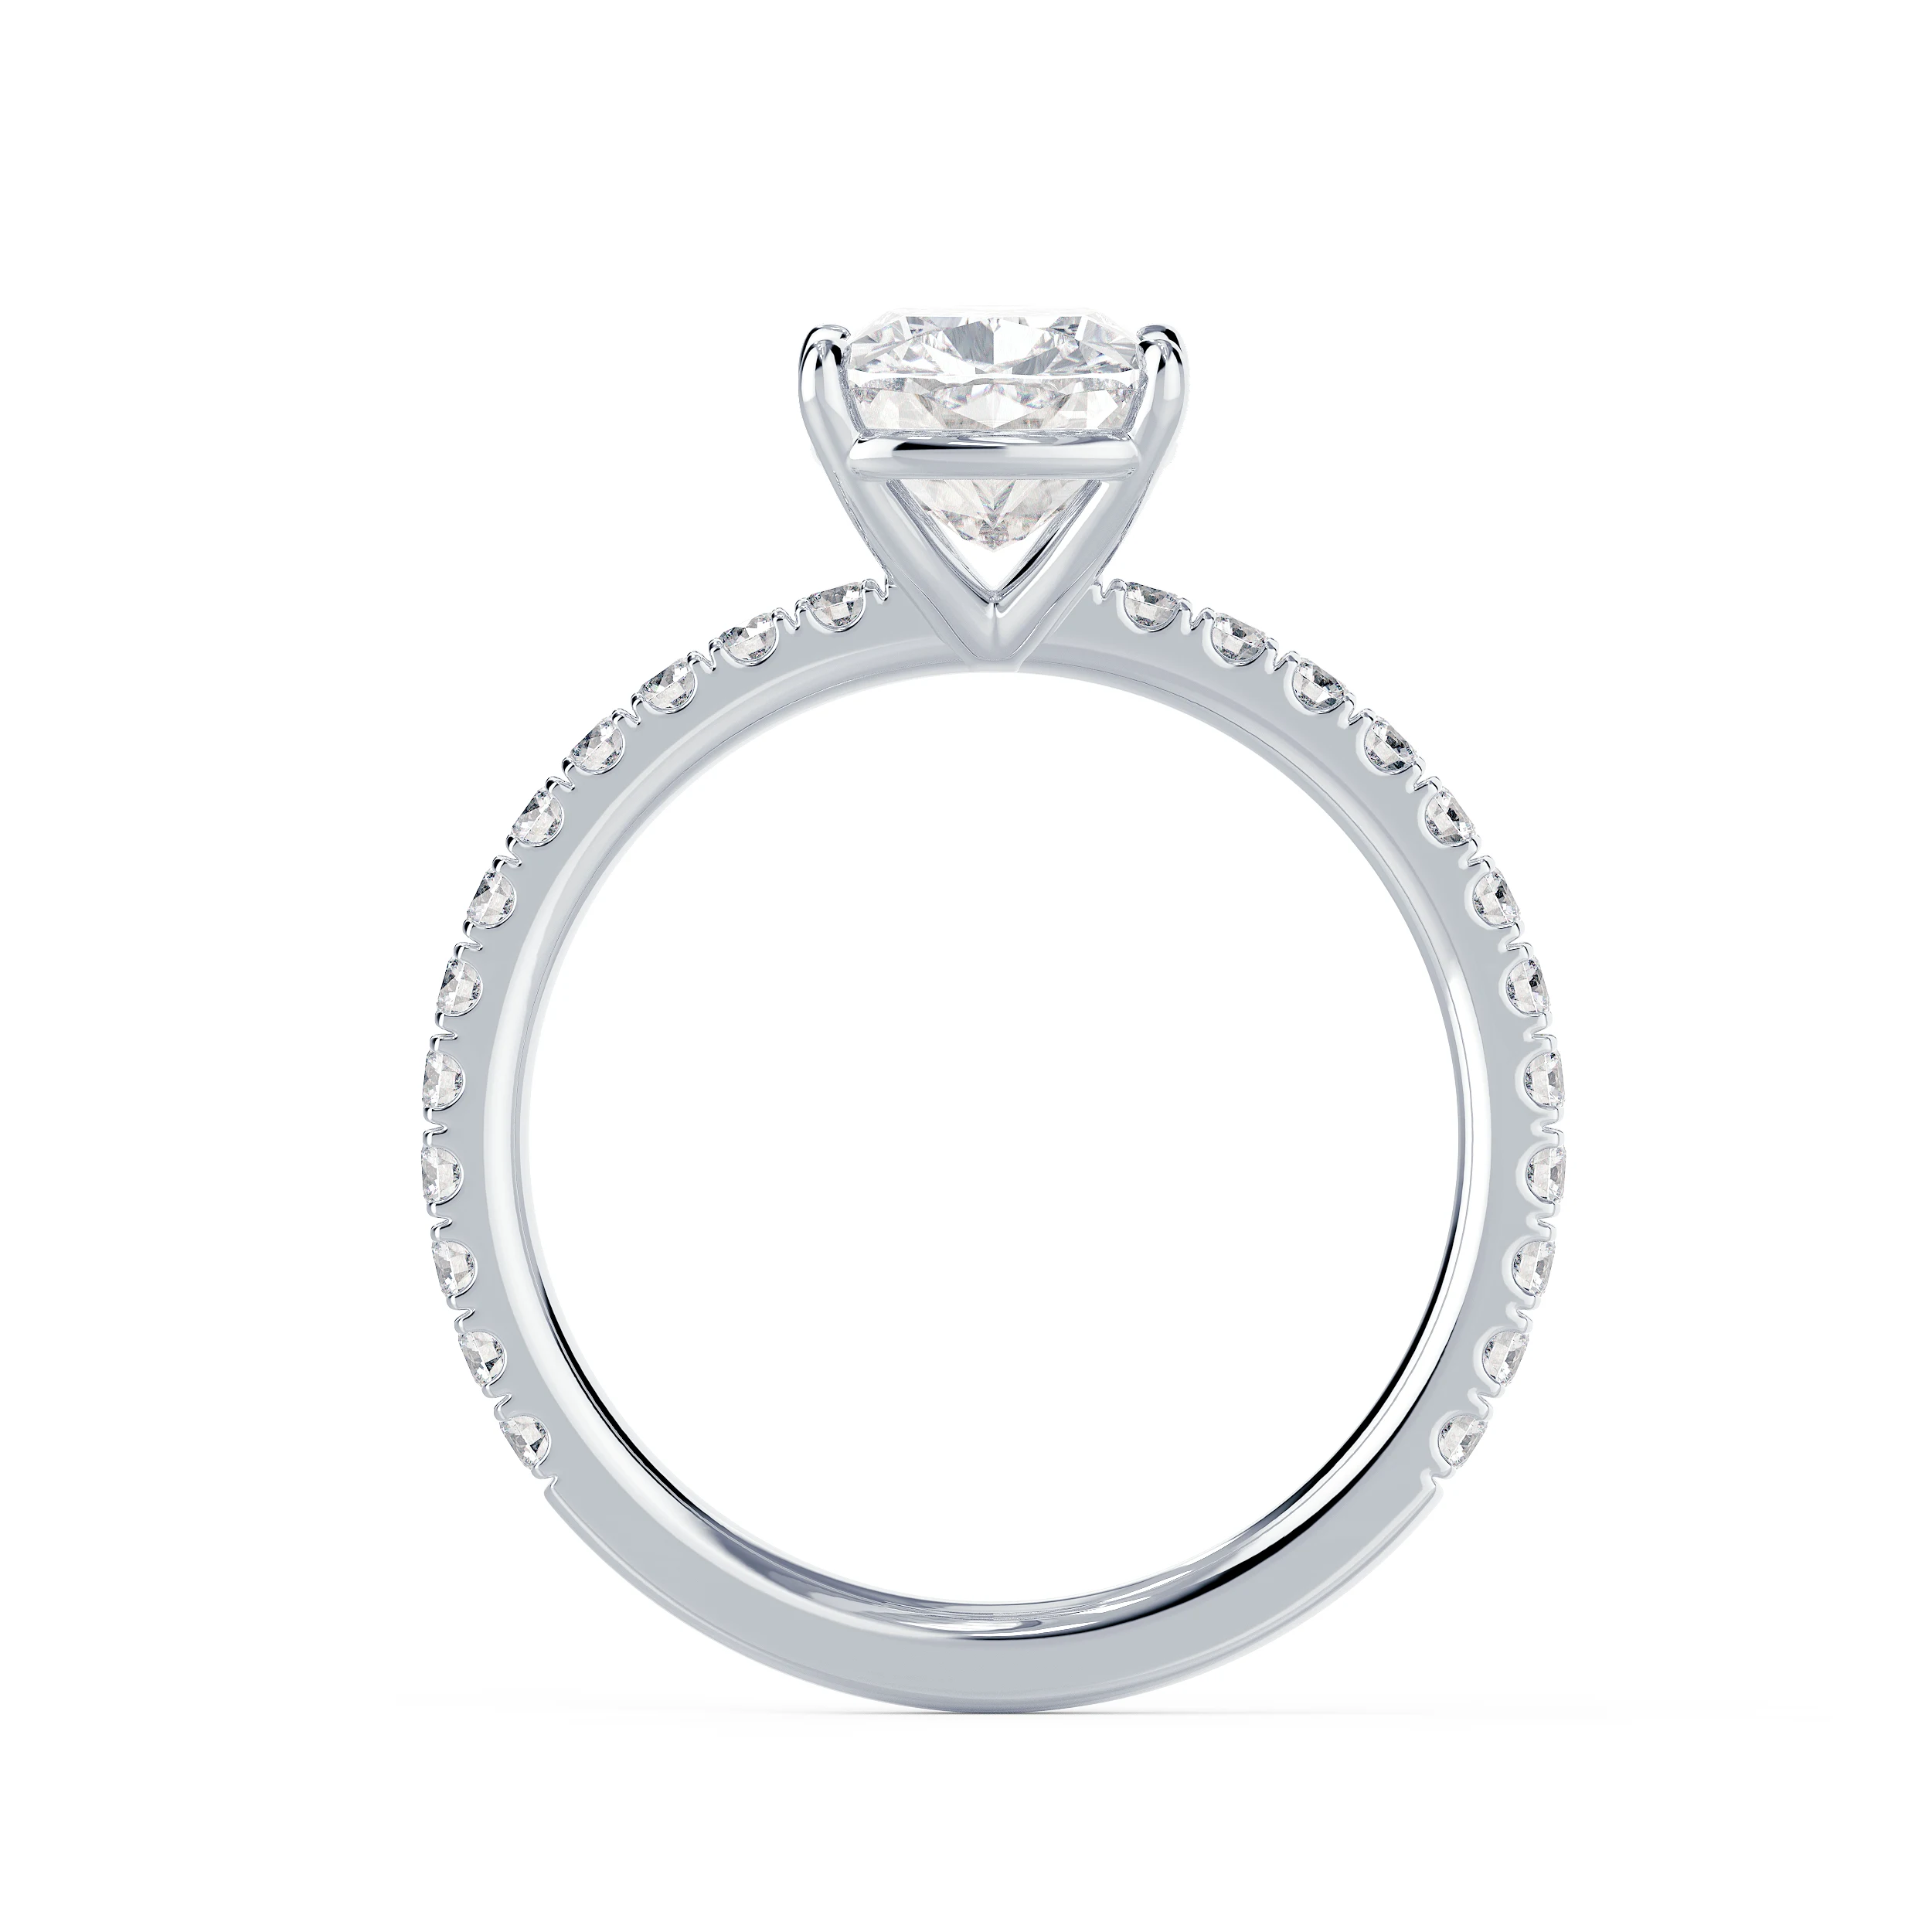 Exceptional Quality Diamonds Cushion Petite Four Prong Pavé Setting in White Gold (Profile View)